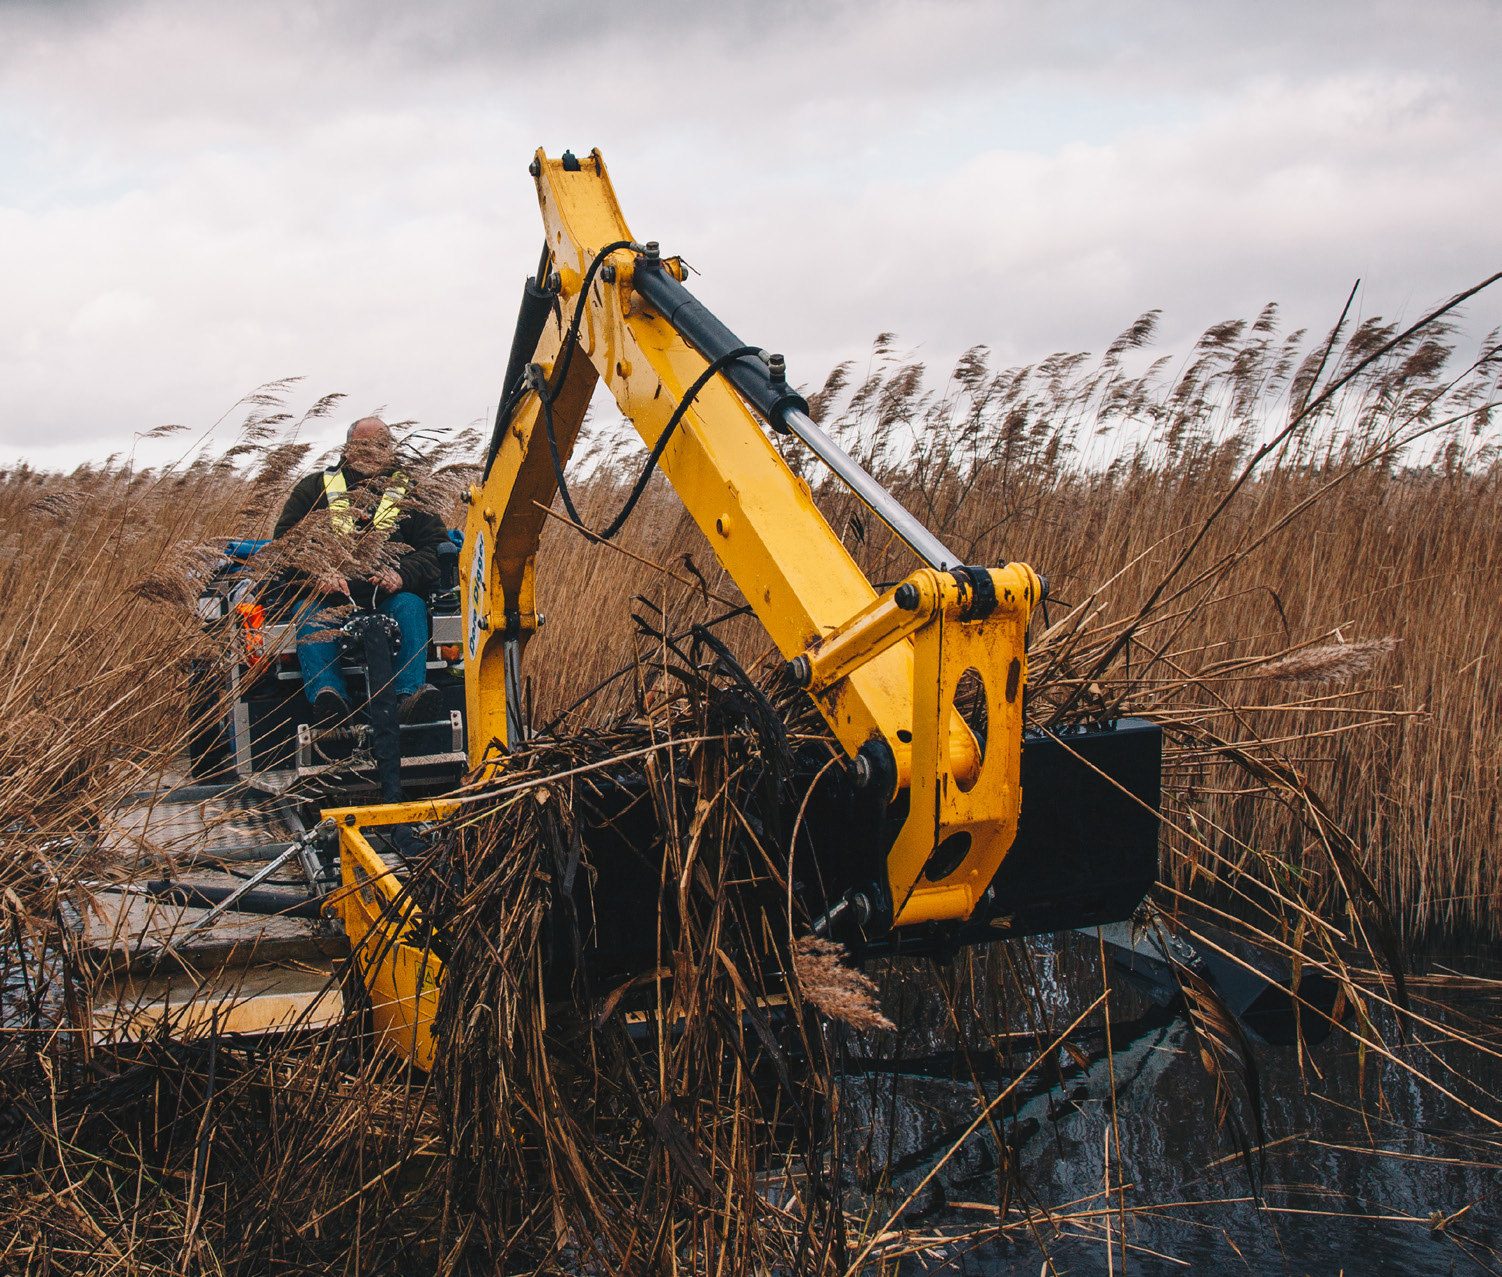 A specialist wetland excavator clearing a reedbed